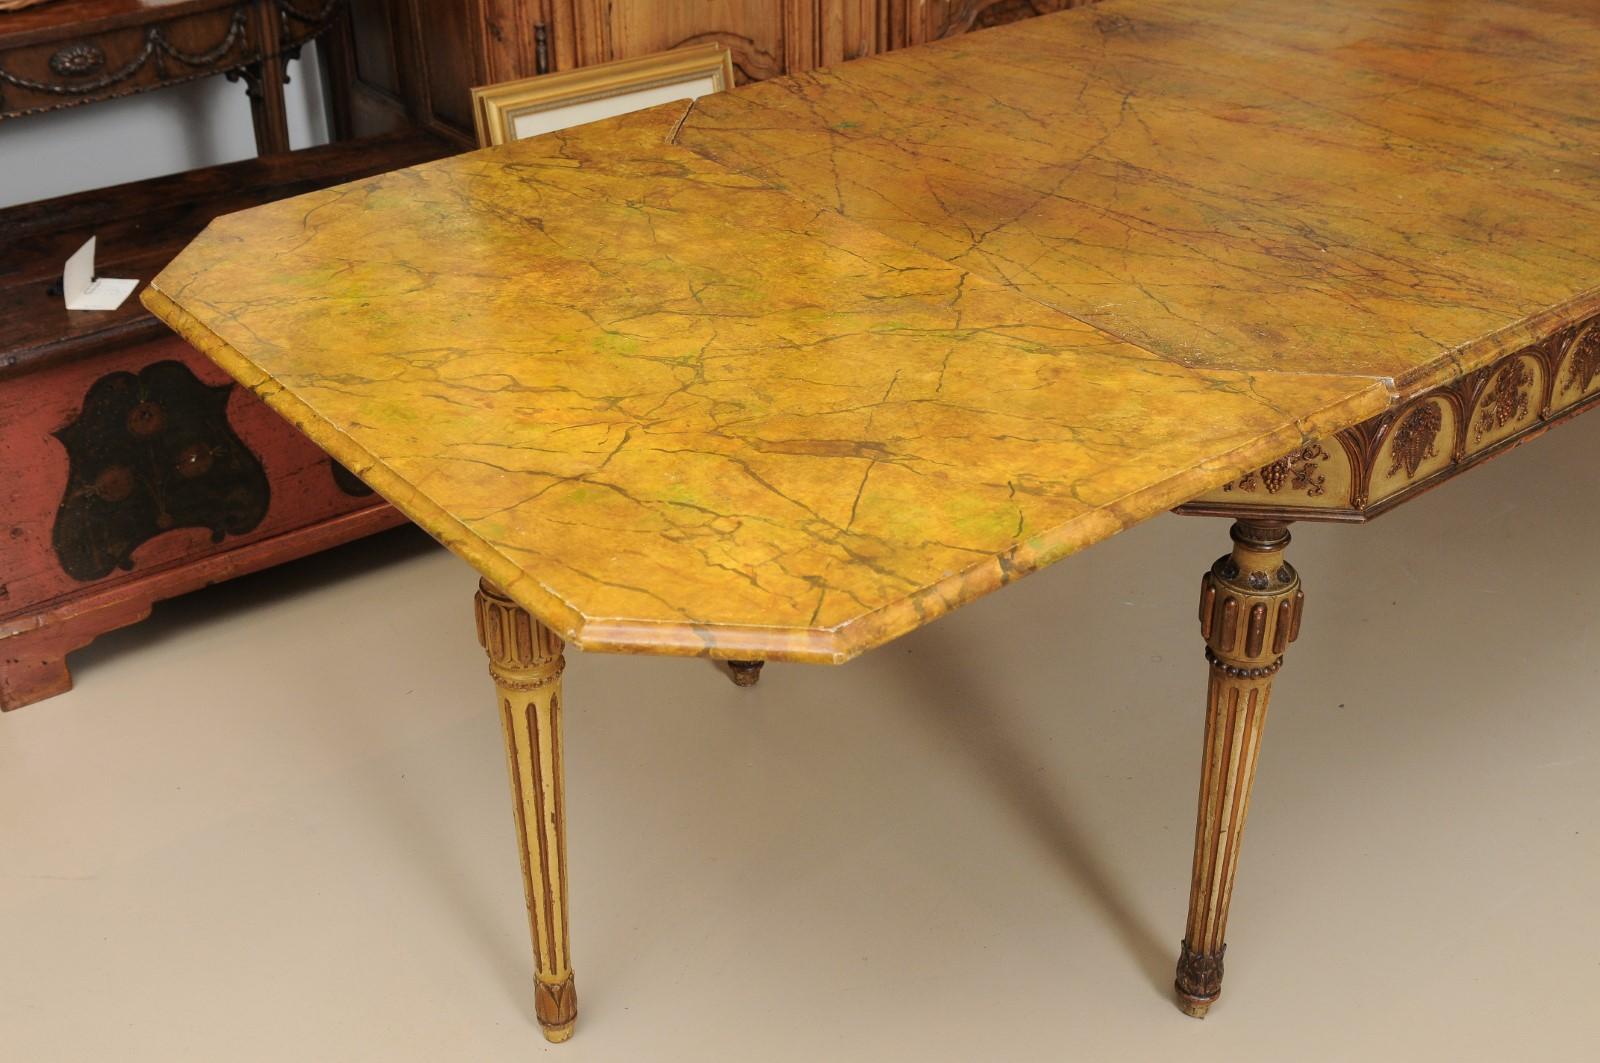 Italian Neapolitan Style Painted Dining Table with Faux Marble Top For Sale 11